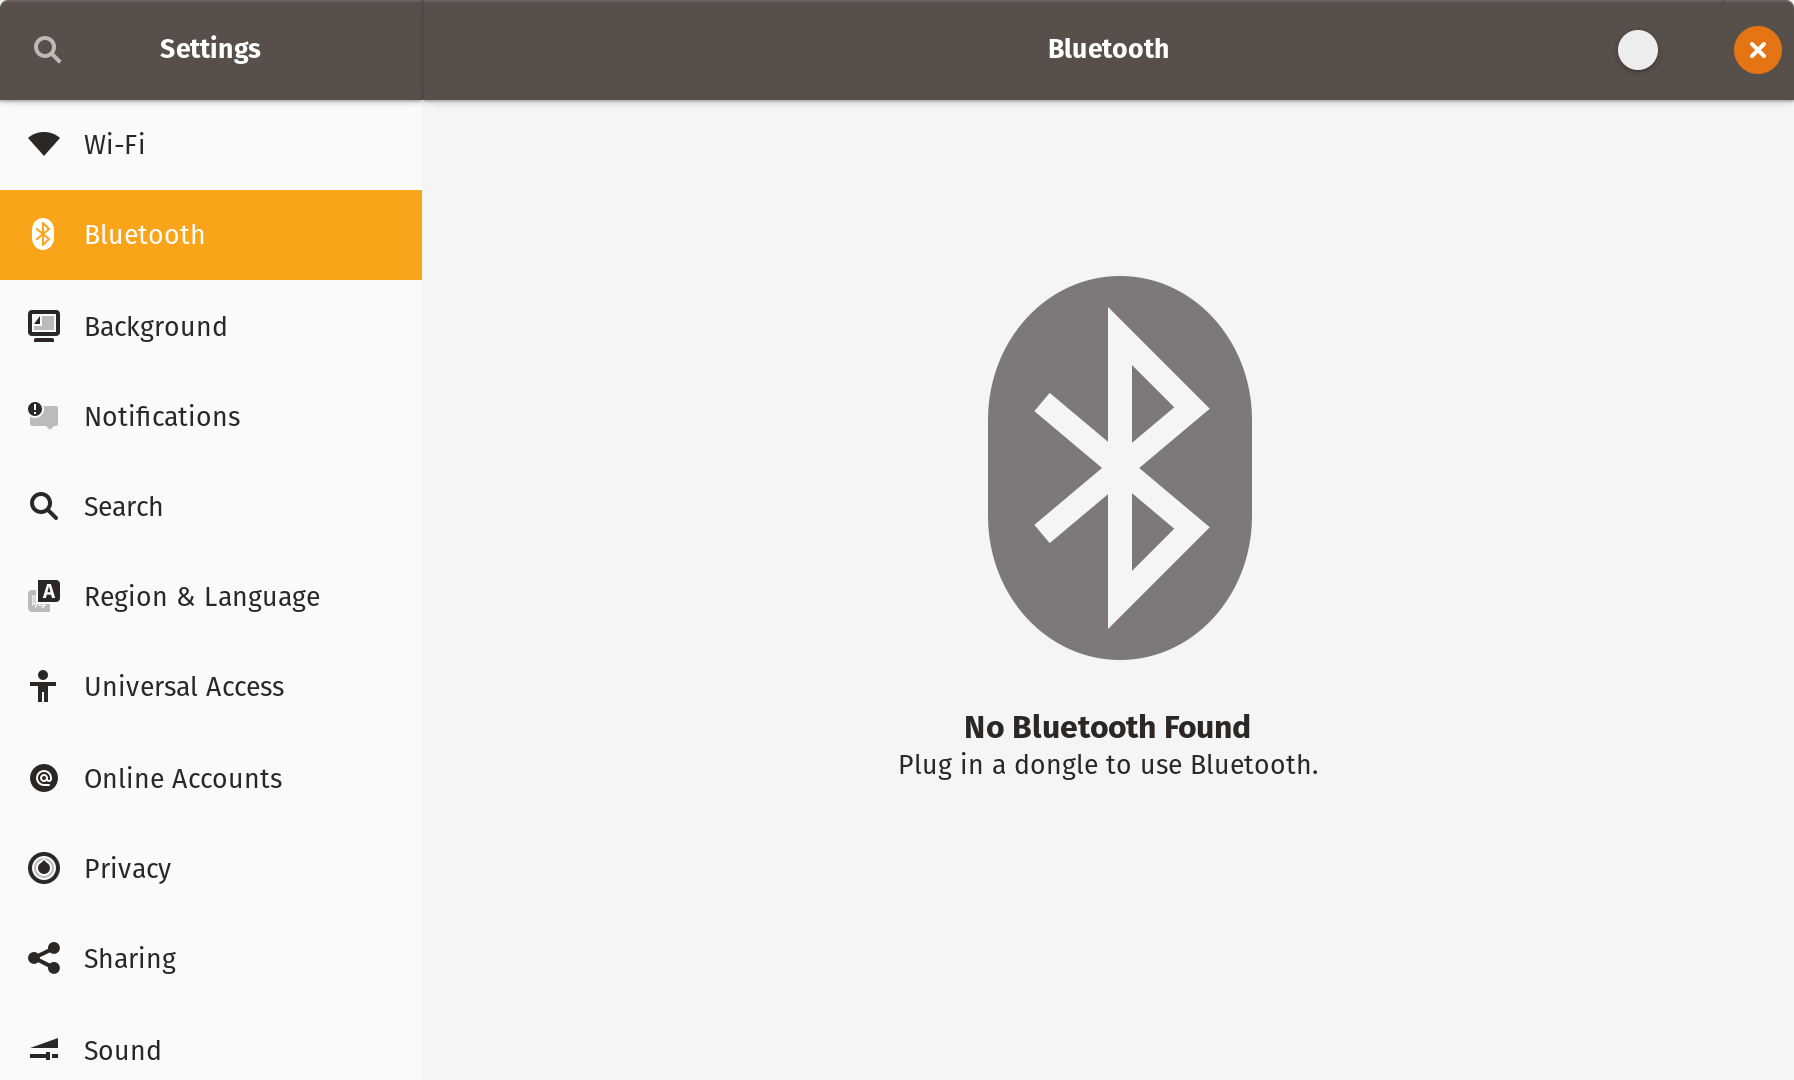 Use of Bluetooth Logo - Fix for “No Bluetooth Found” error after wake from sleep – Aral Balkan